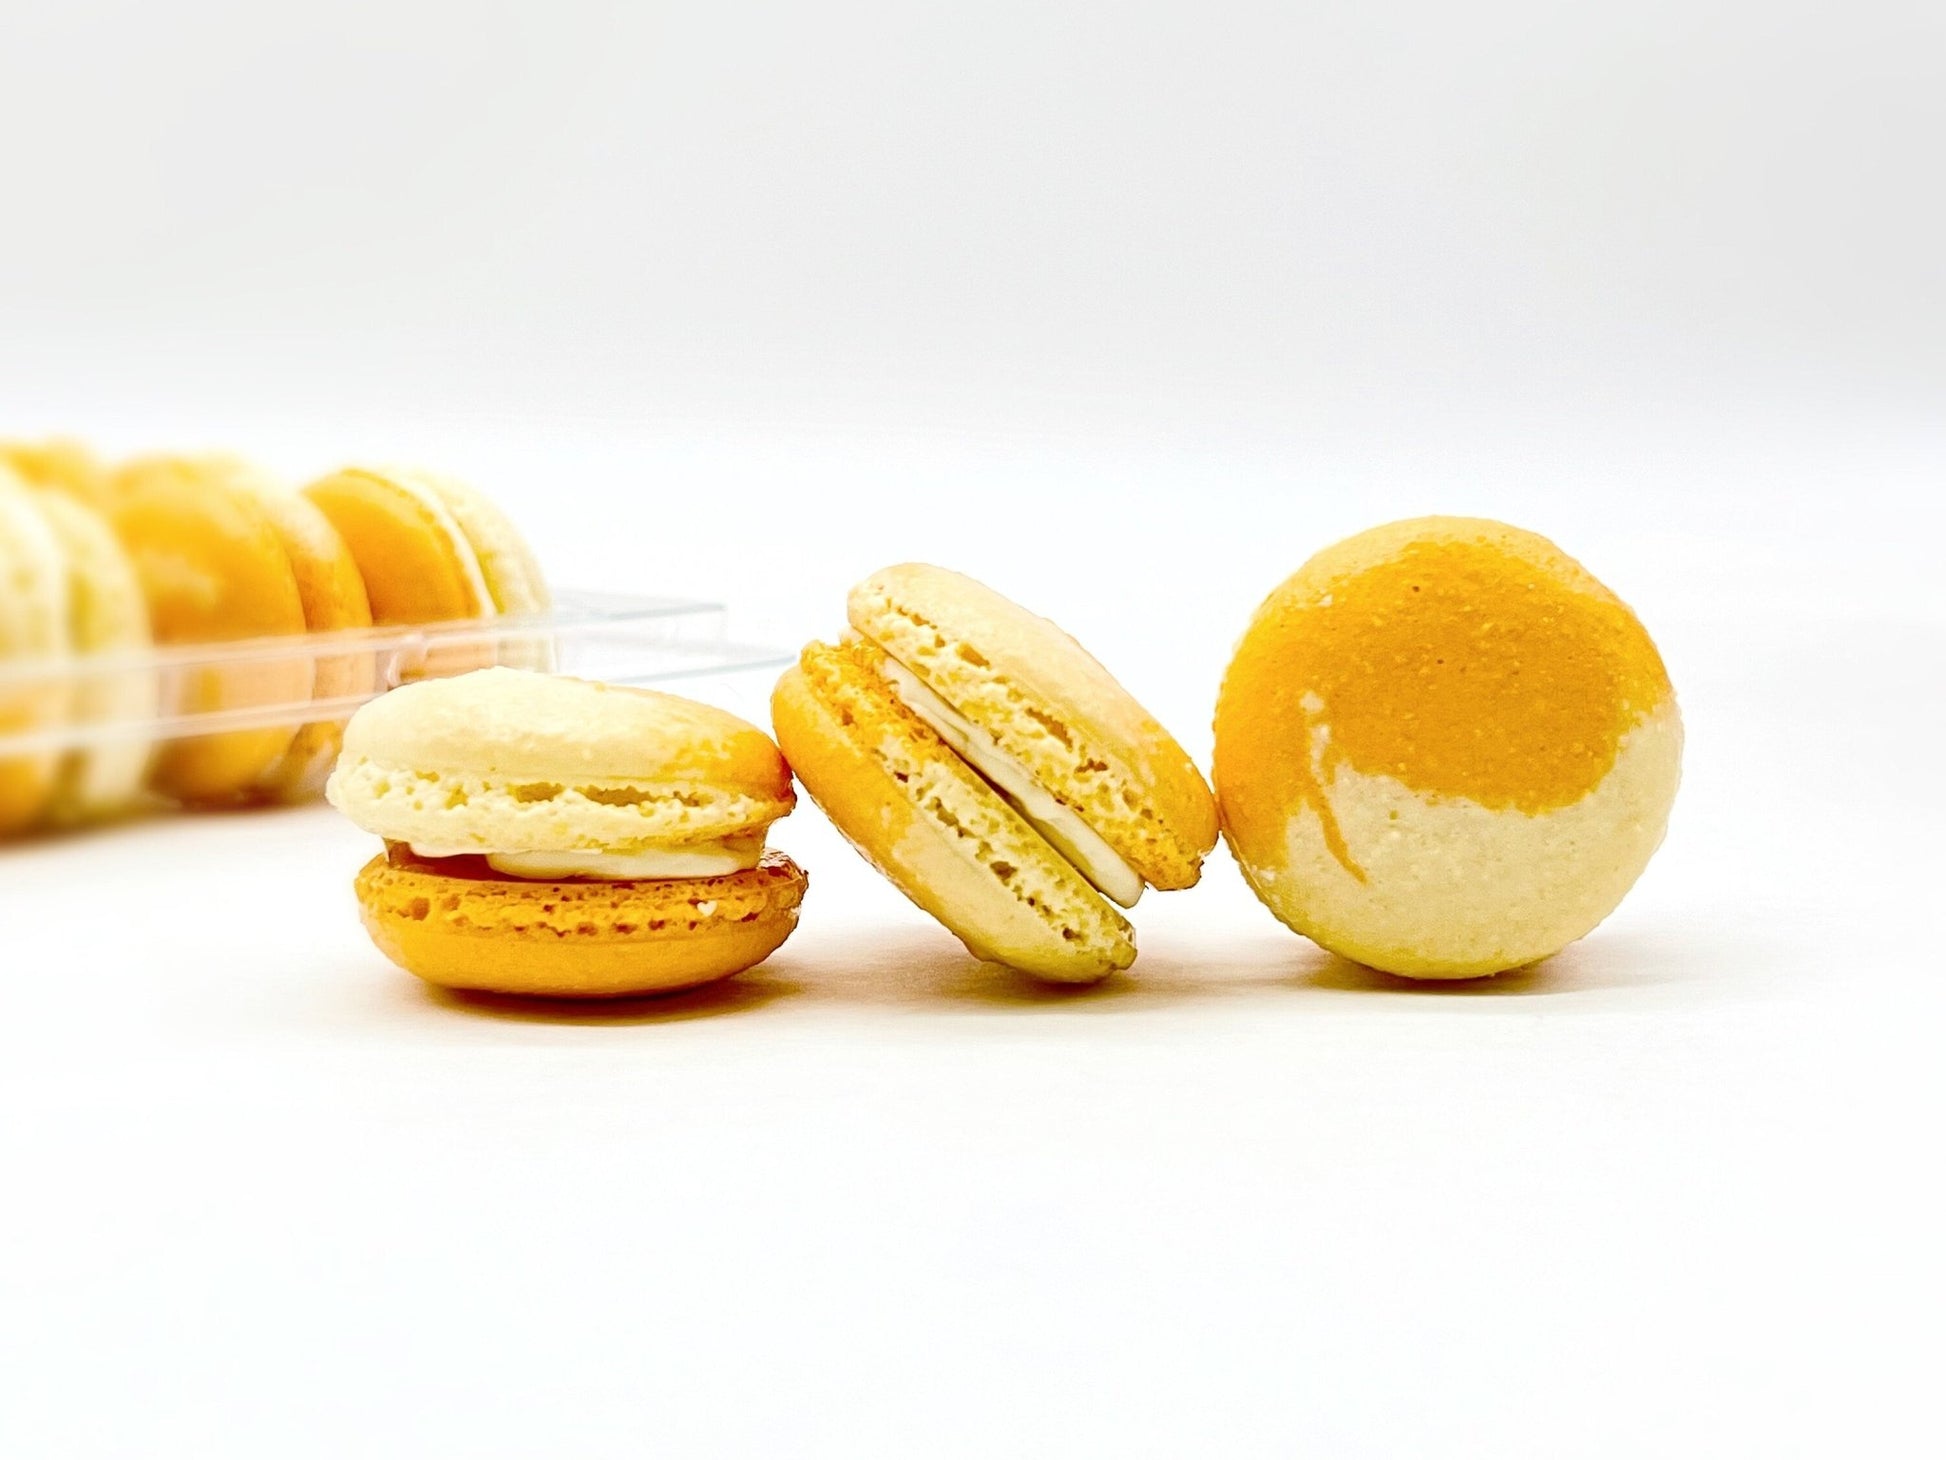 50 Pack White Chocolate Apricot French Macaron Value Pack - Macaron Centrale